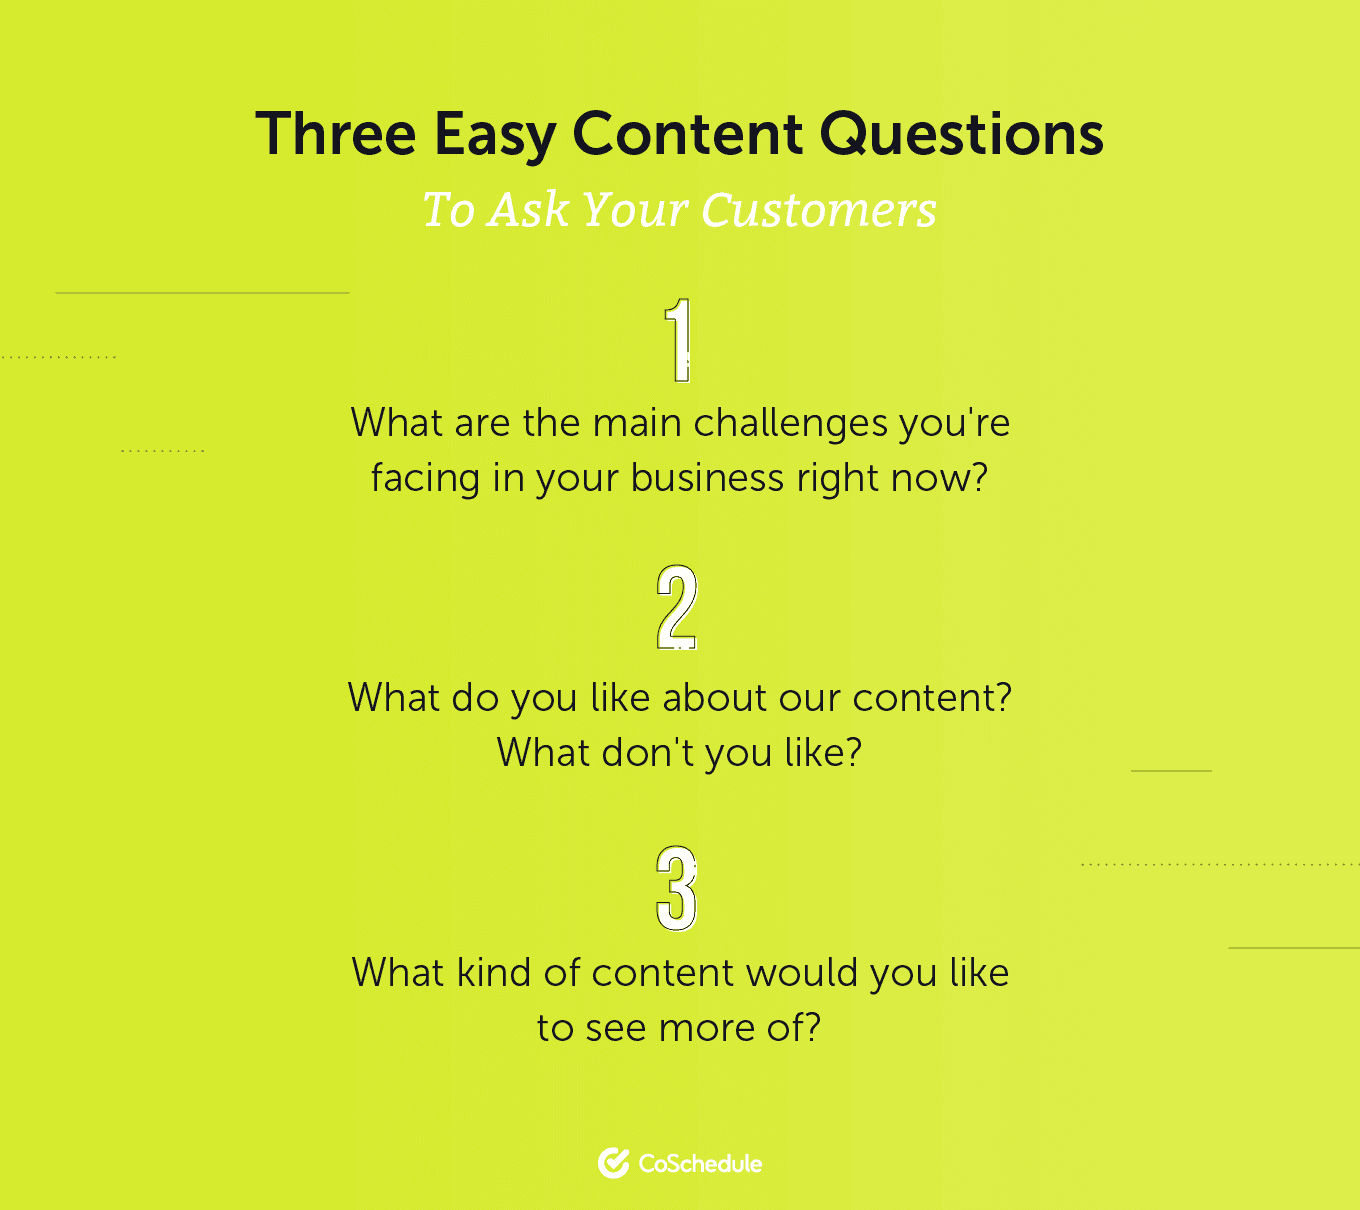 Three Easy Content Questions to Ask Your Customers